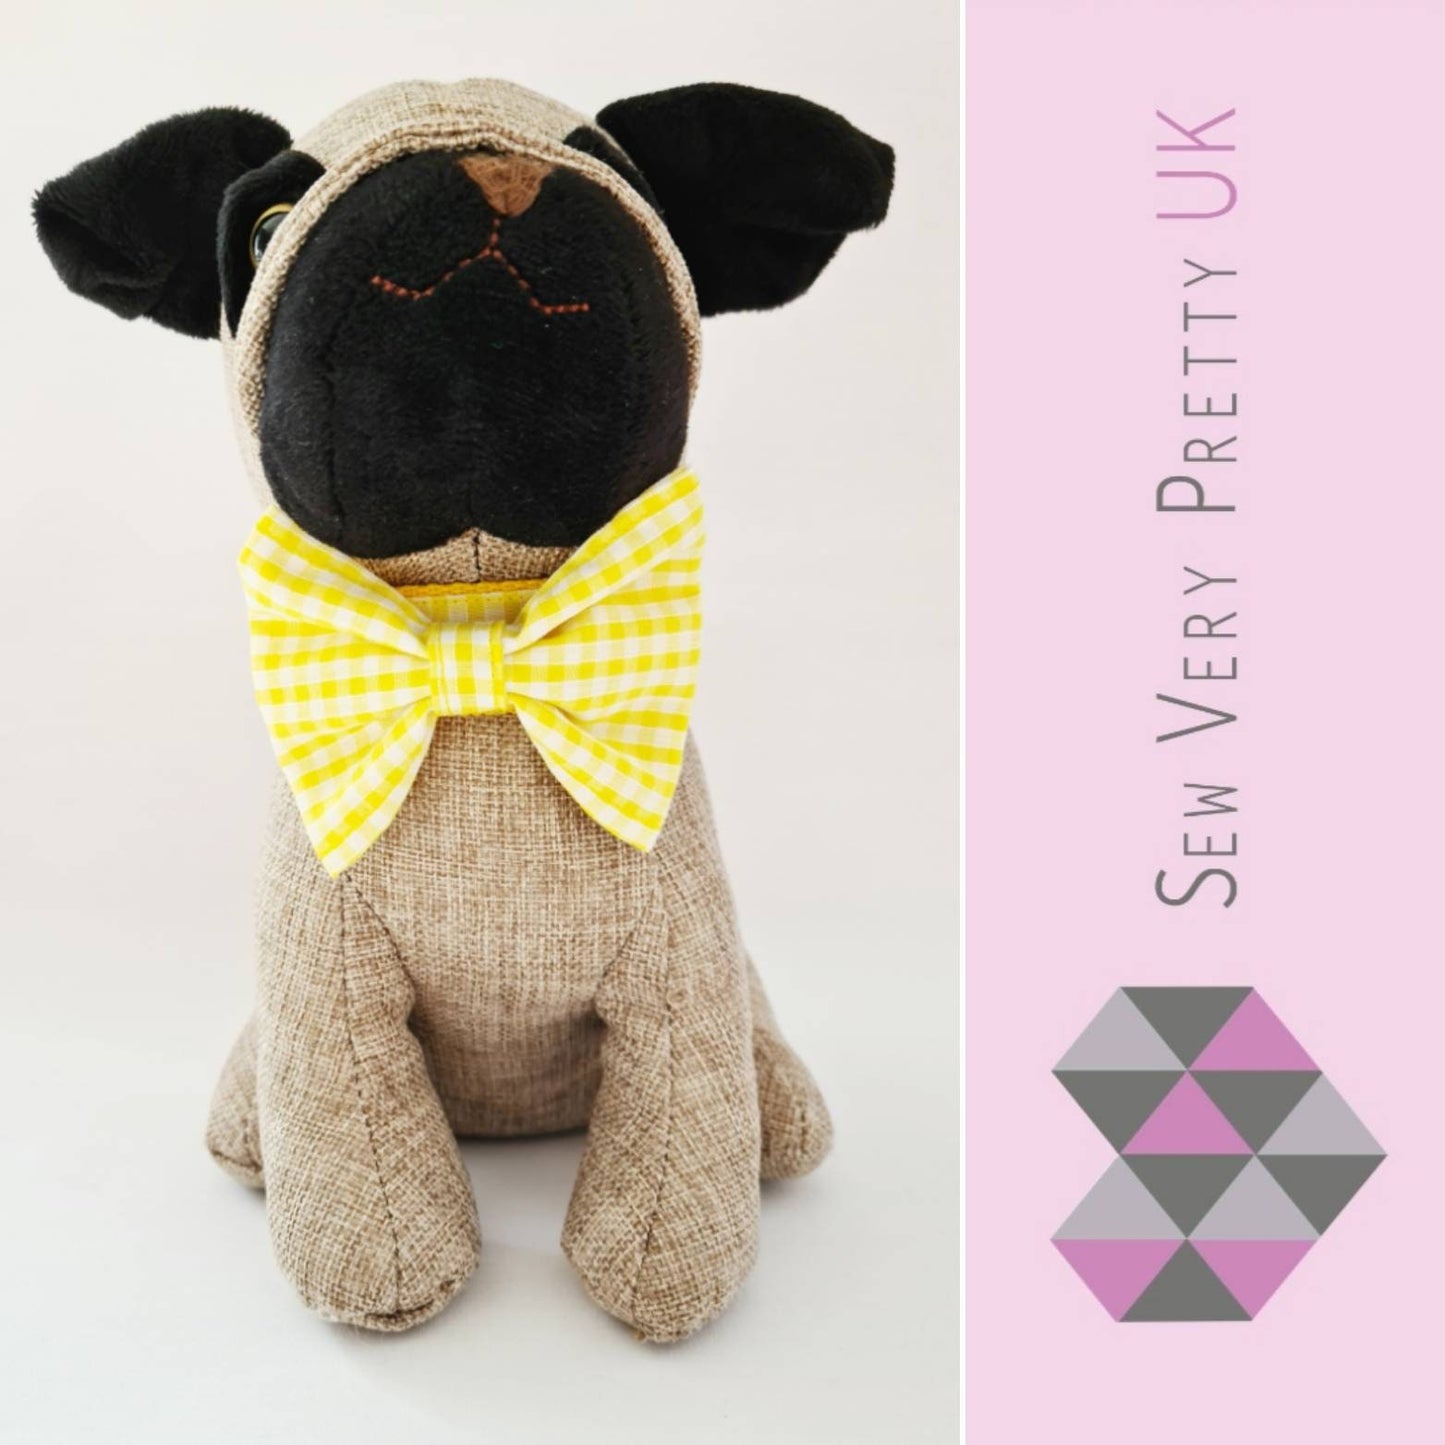 Yellow gingham bow tie